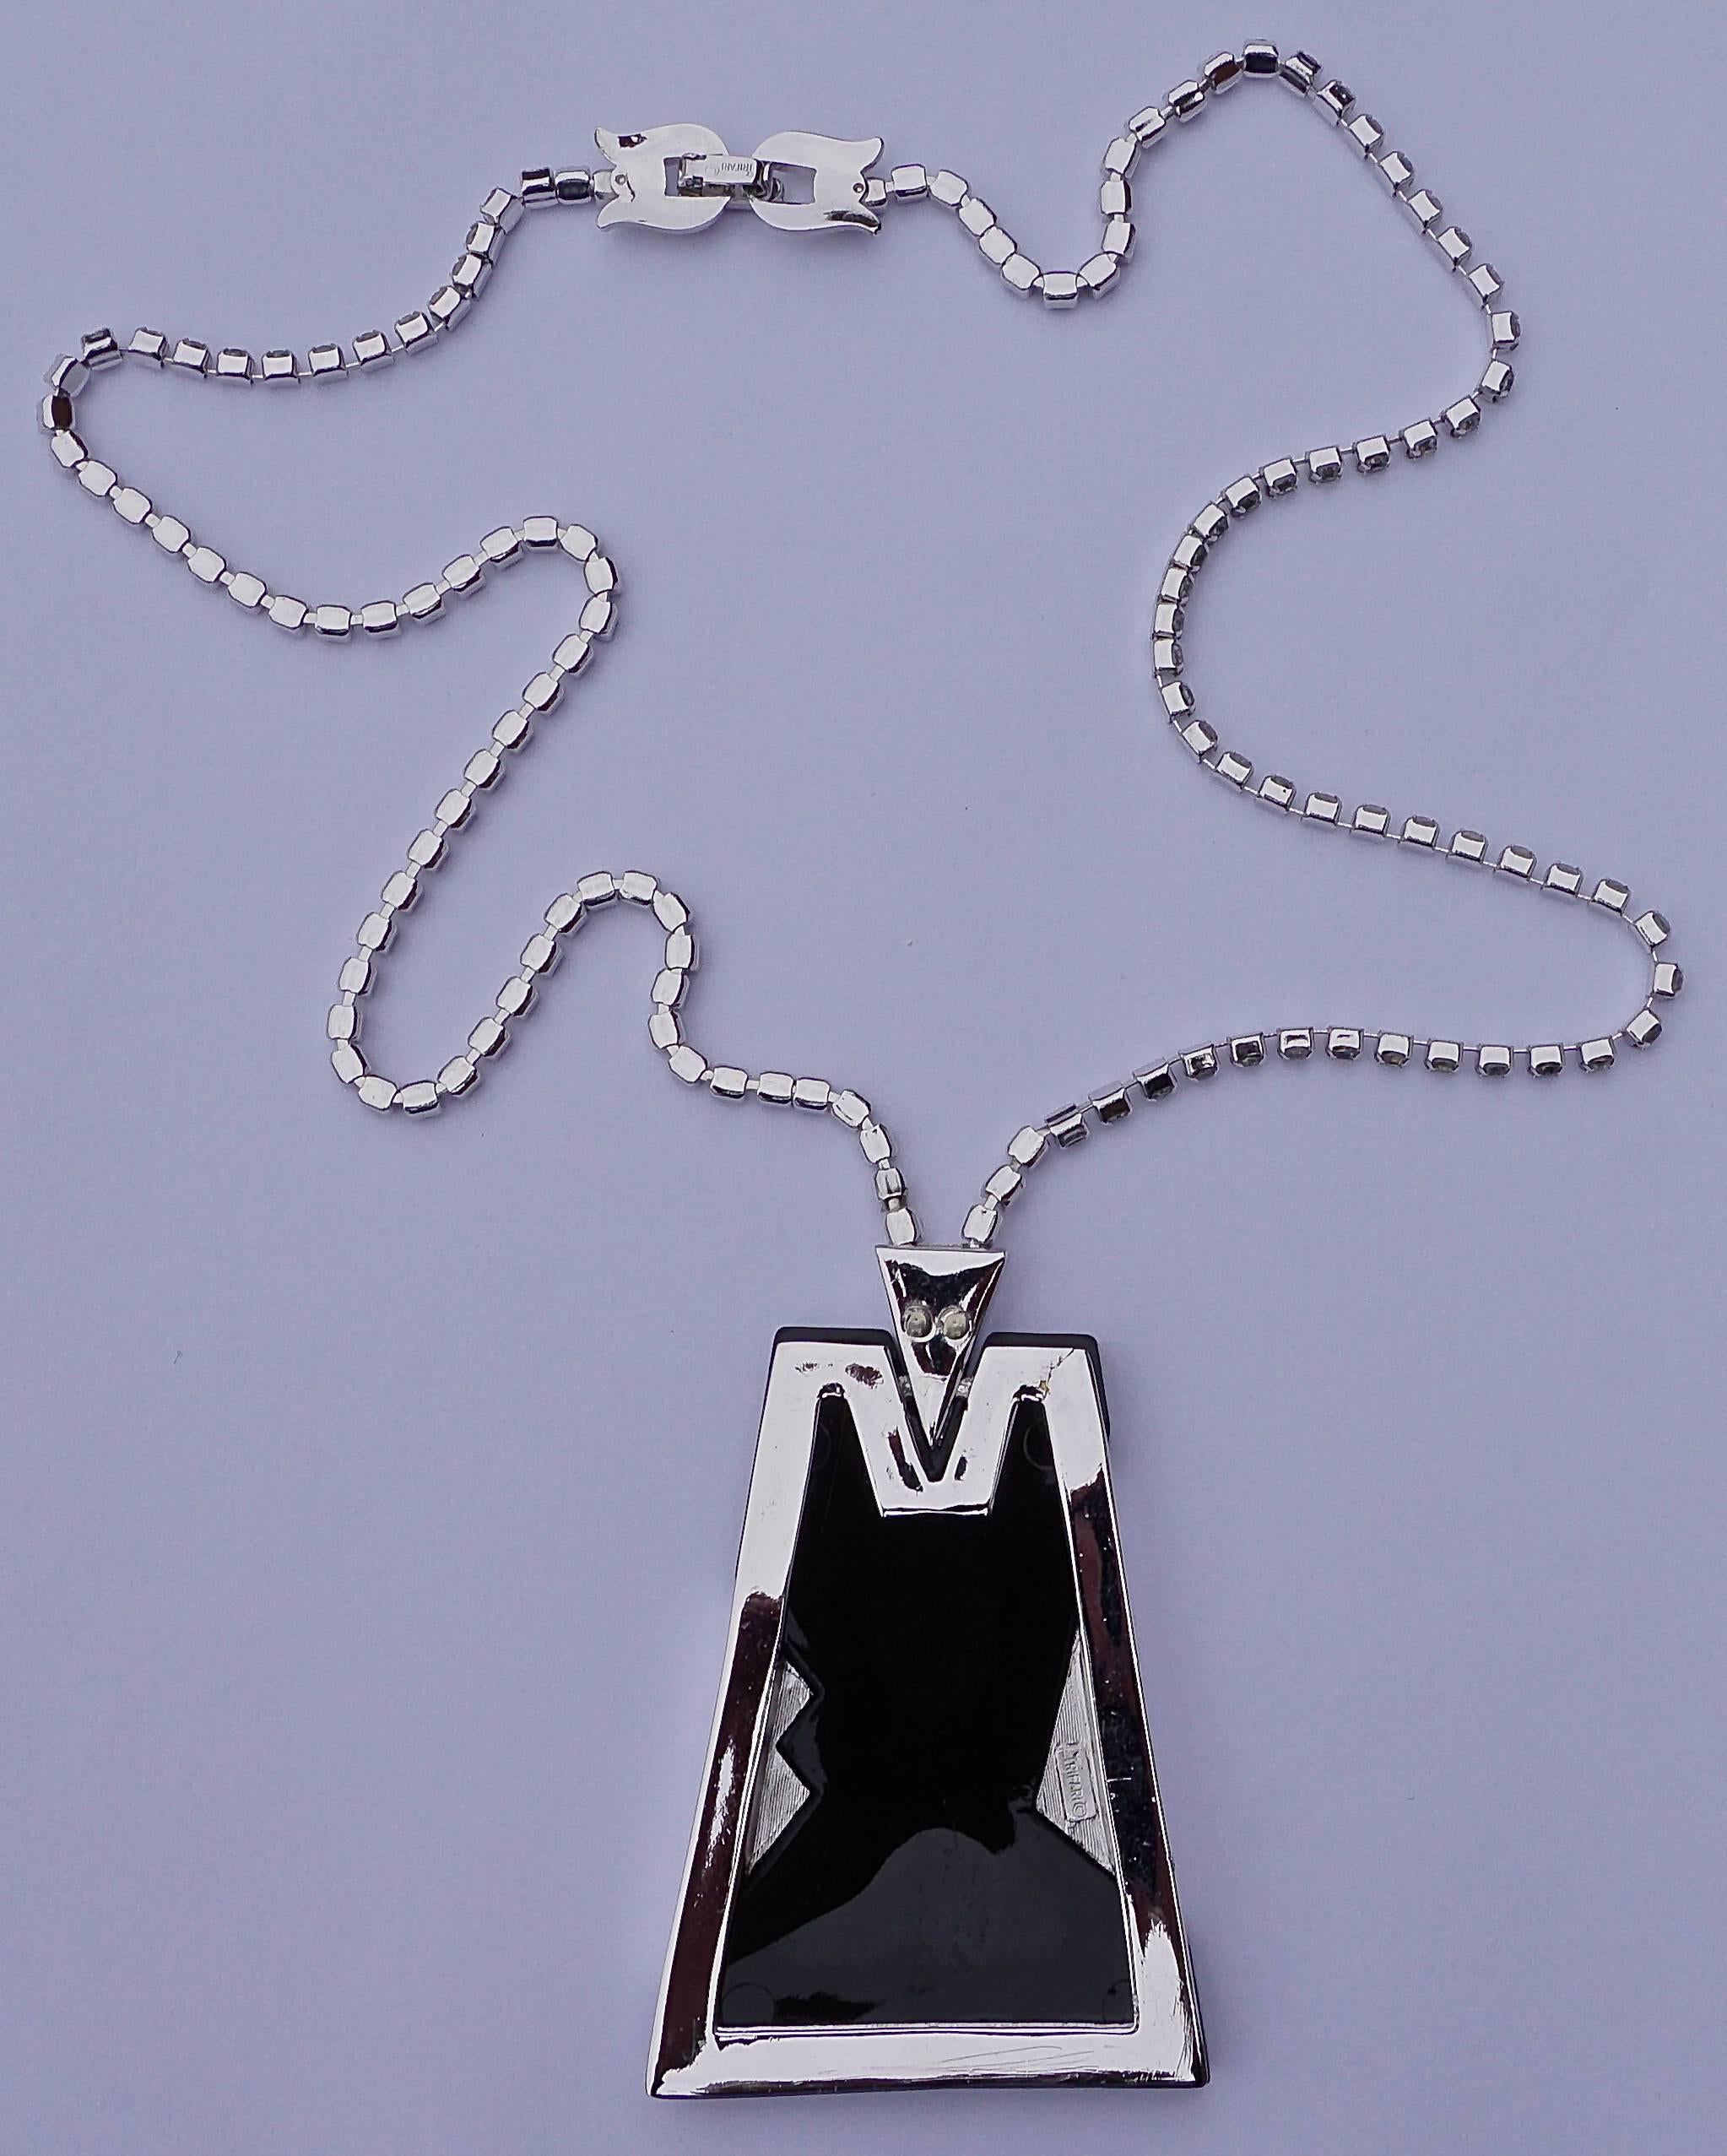 Vintage silver tone necklace, featuring a beautiful black lucite and rhinestone pendant, circa 1970s. Stamped Trifari on the reverse of the pendant and the clasp. The Art Deco style pendant measures 4.8cm / 1.9 inches, graduating to 2.8cm / 1.1